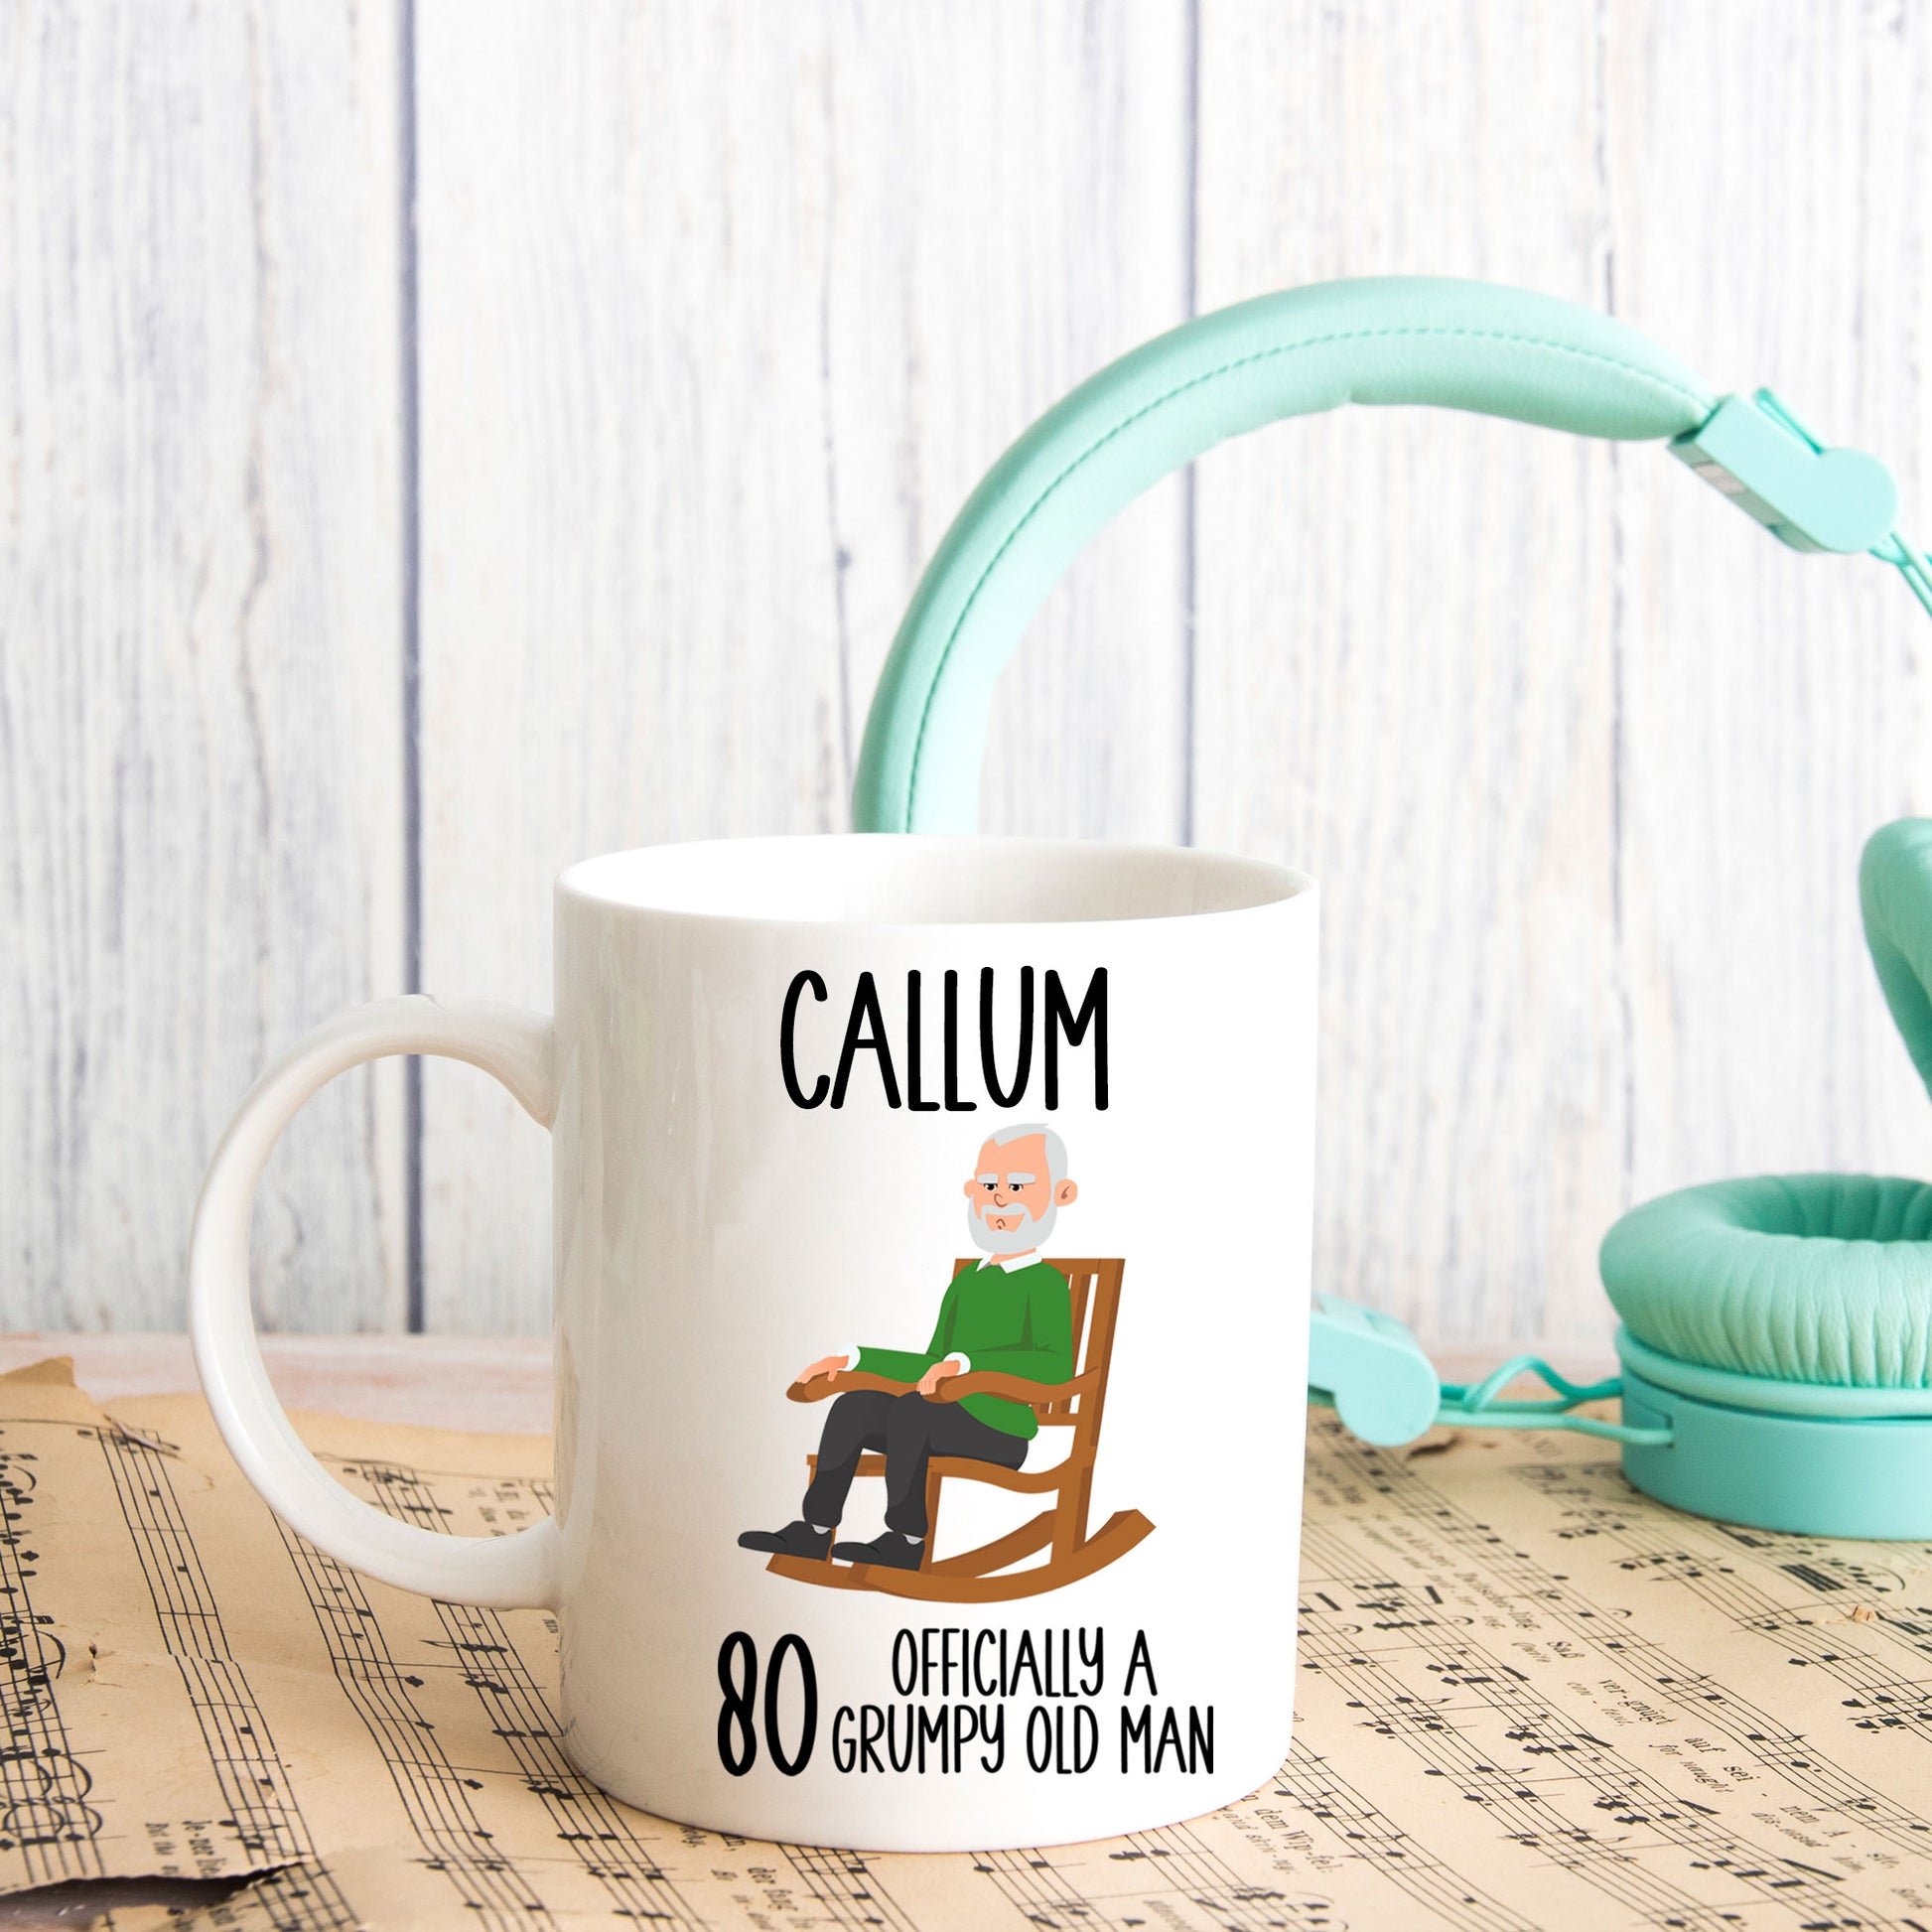 80 Officially A Grumpy Old Man Mug and/or Coaster Gift  - Always Looking Good -   